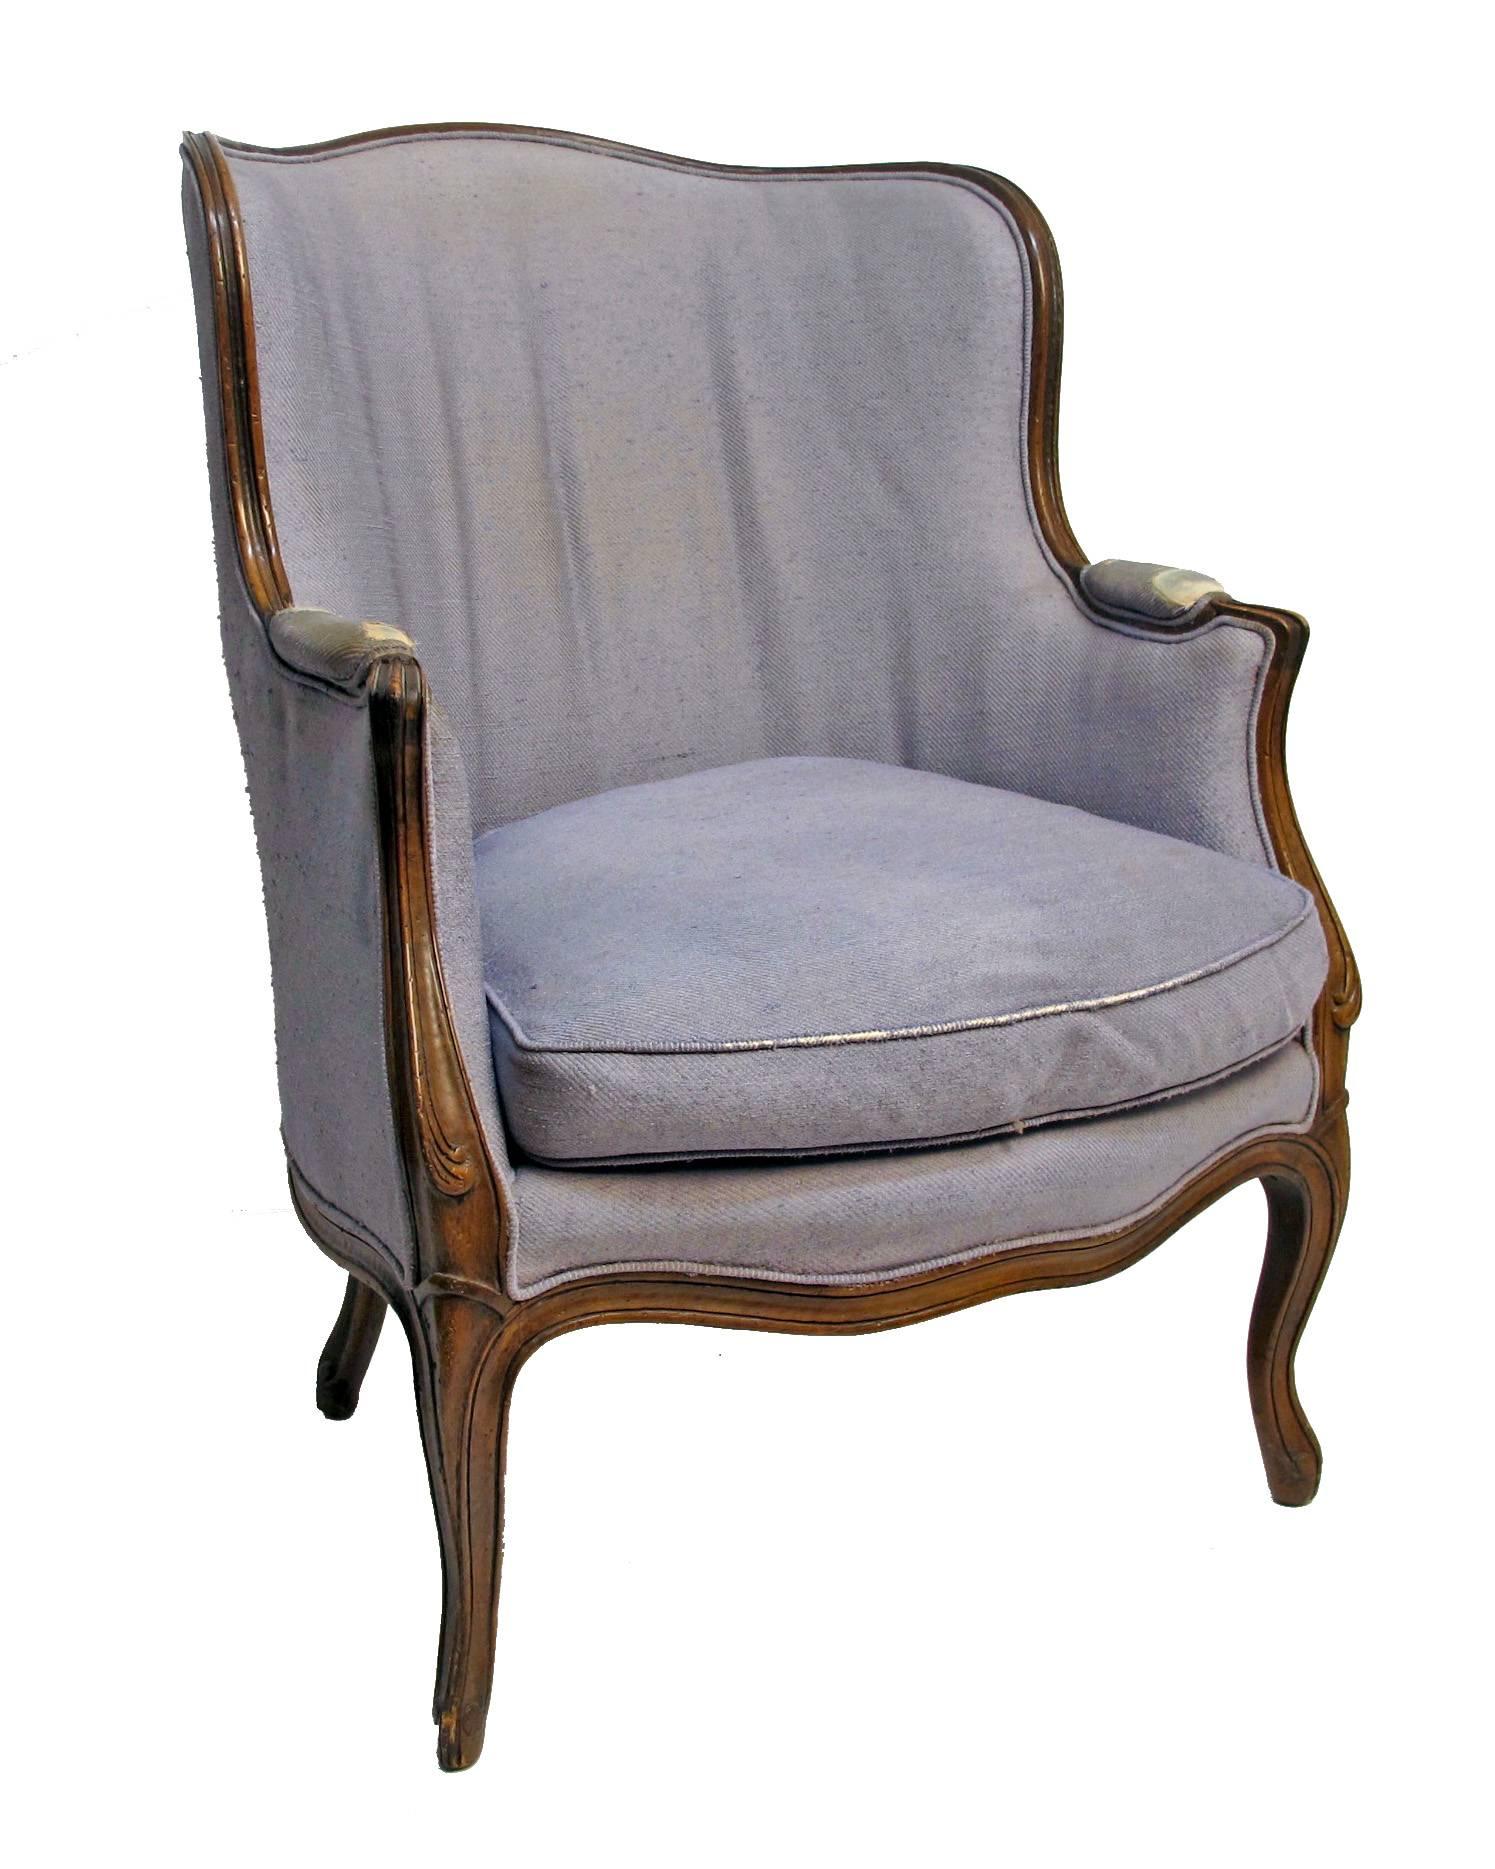 A good quality traditional style carved bergere chair with solid sturdy beechwood frame. Having original label for Yale R. Burge. In need of new upholstery.